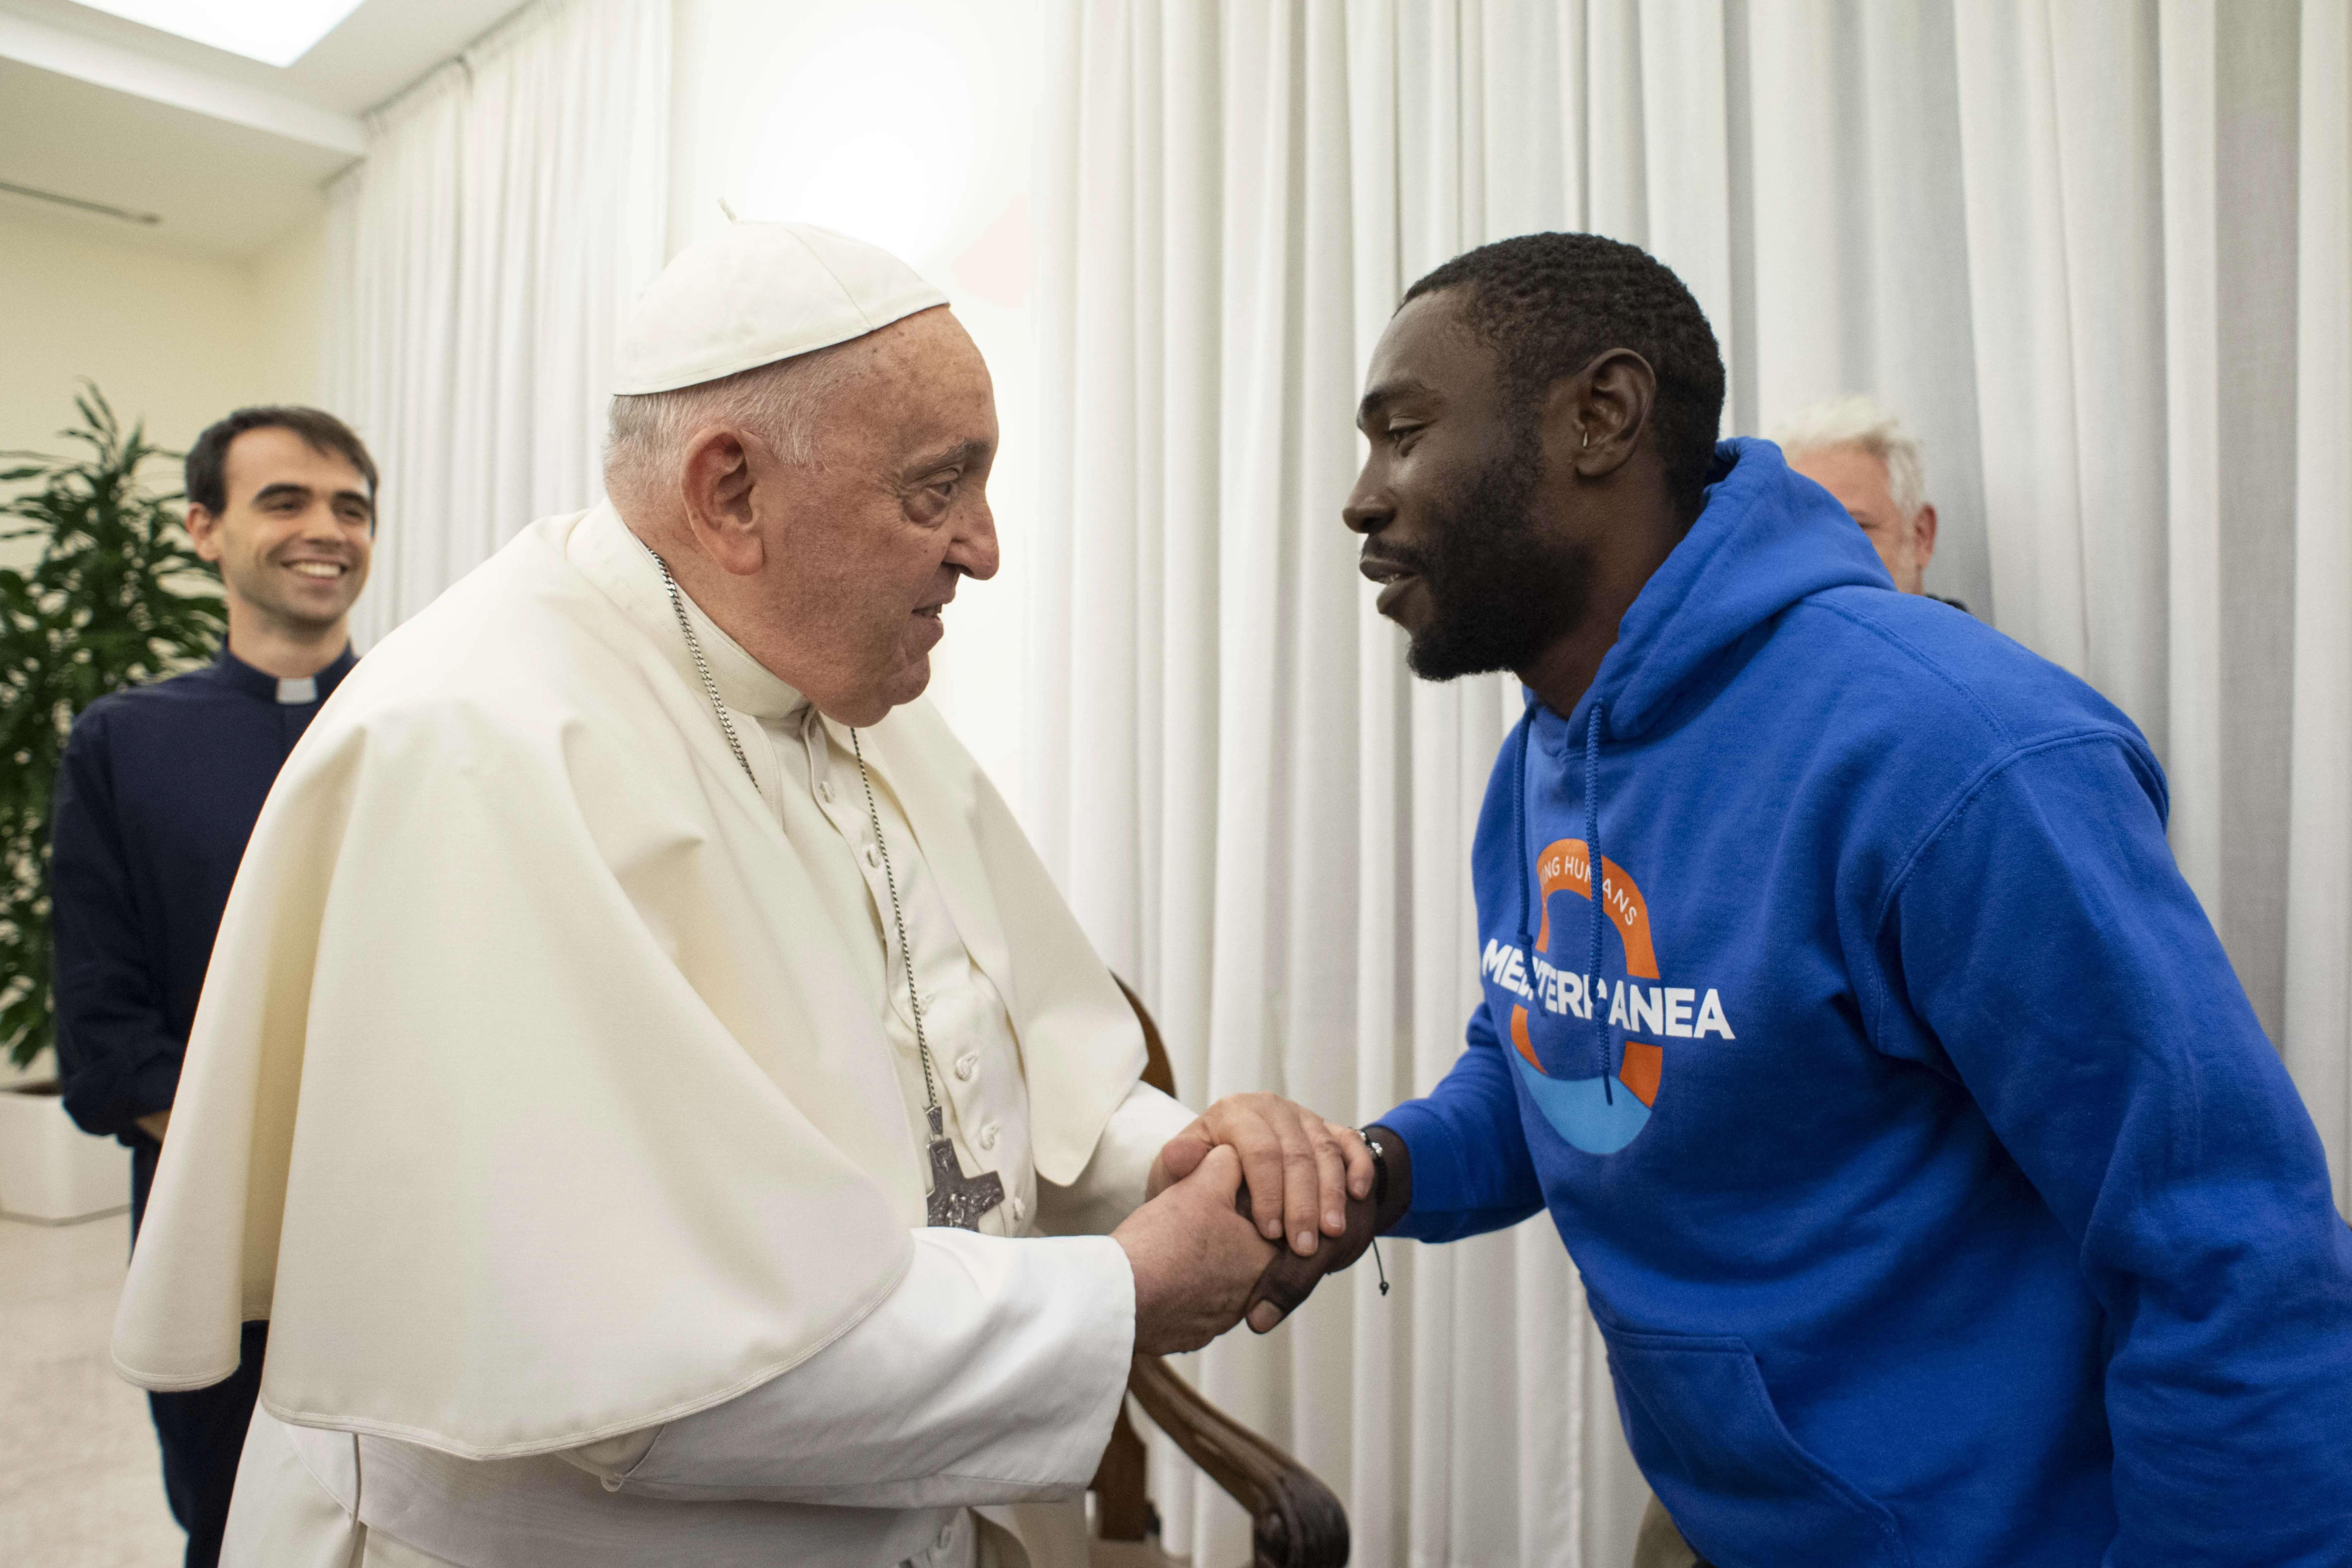 Pope Francis meets with Mbengue Nyimbilo Crepin, a 30-year-old man from Cameroon who shared his story during a meeting at the pope’s Vatican City residence Casa Santa Marta on Nov. 17, 2023. Credit: Vatican Media